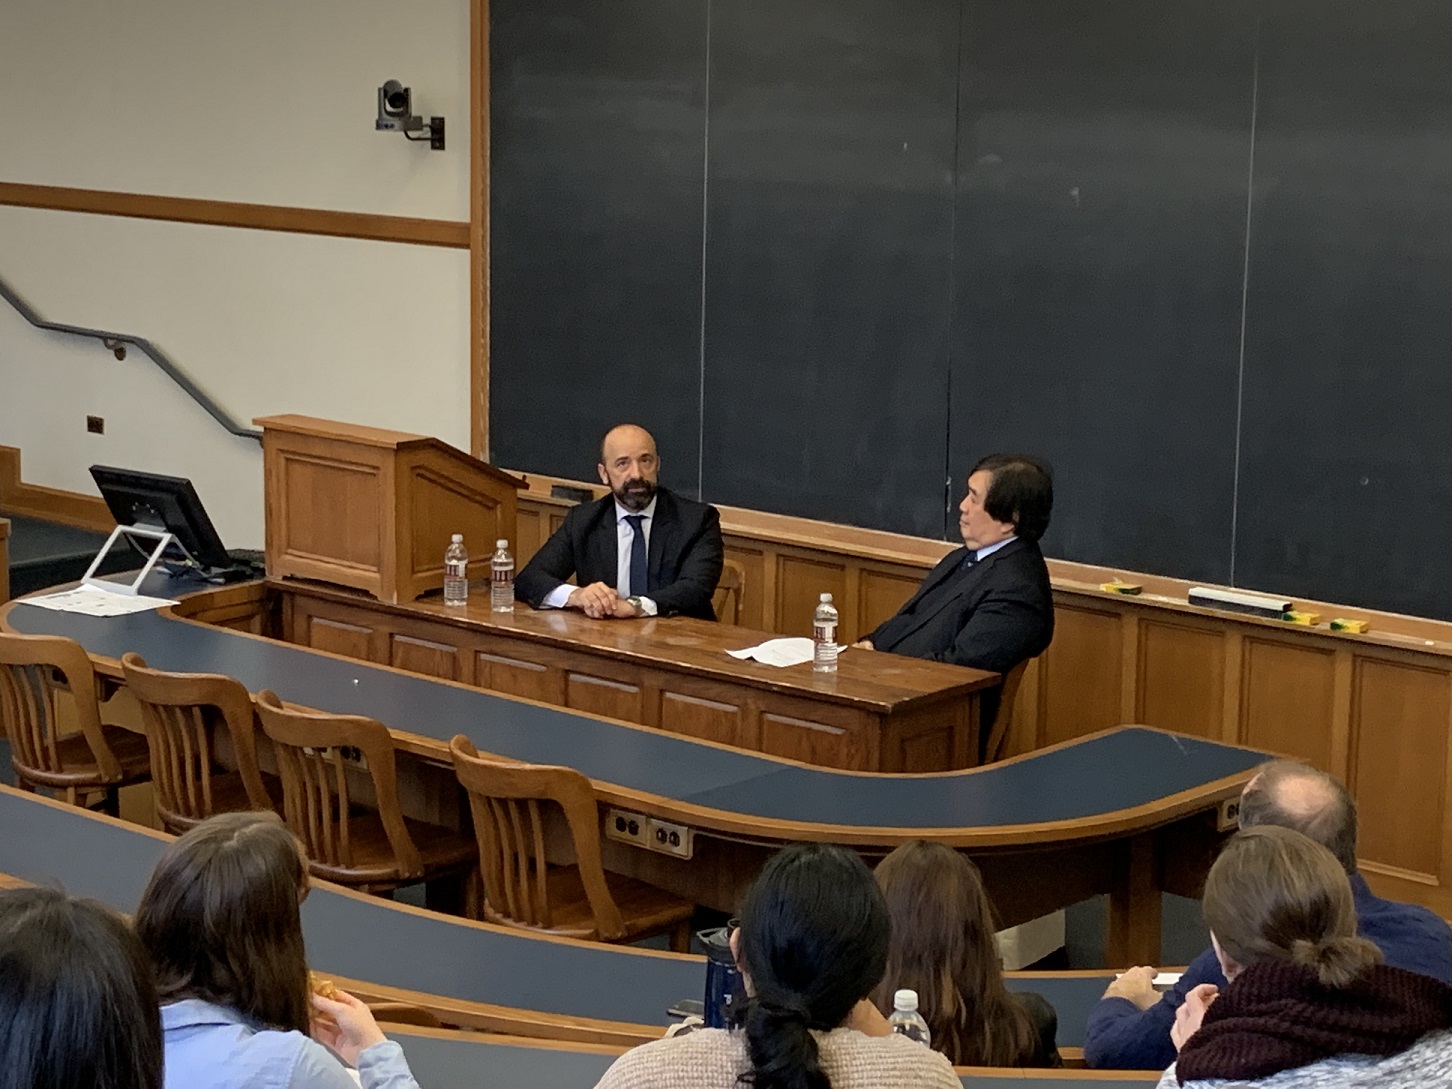 The UN Legal Counsel at Yale Law School